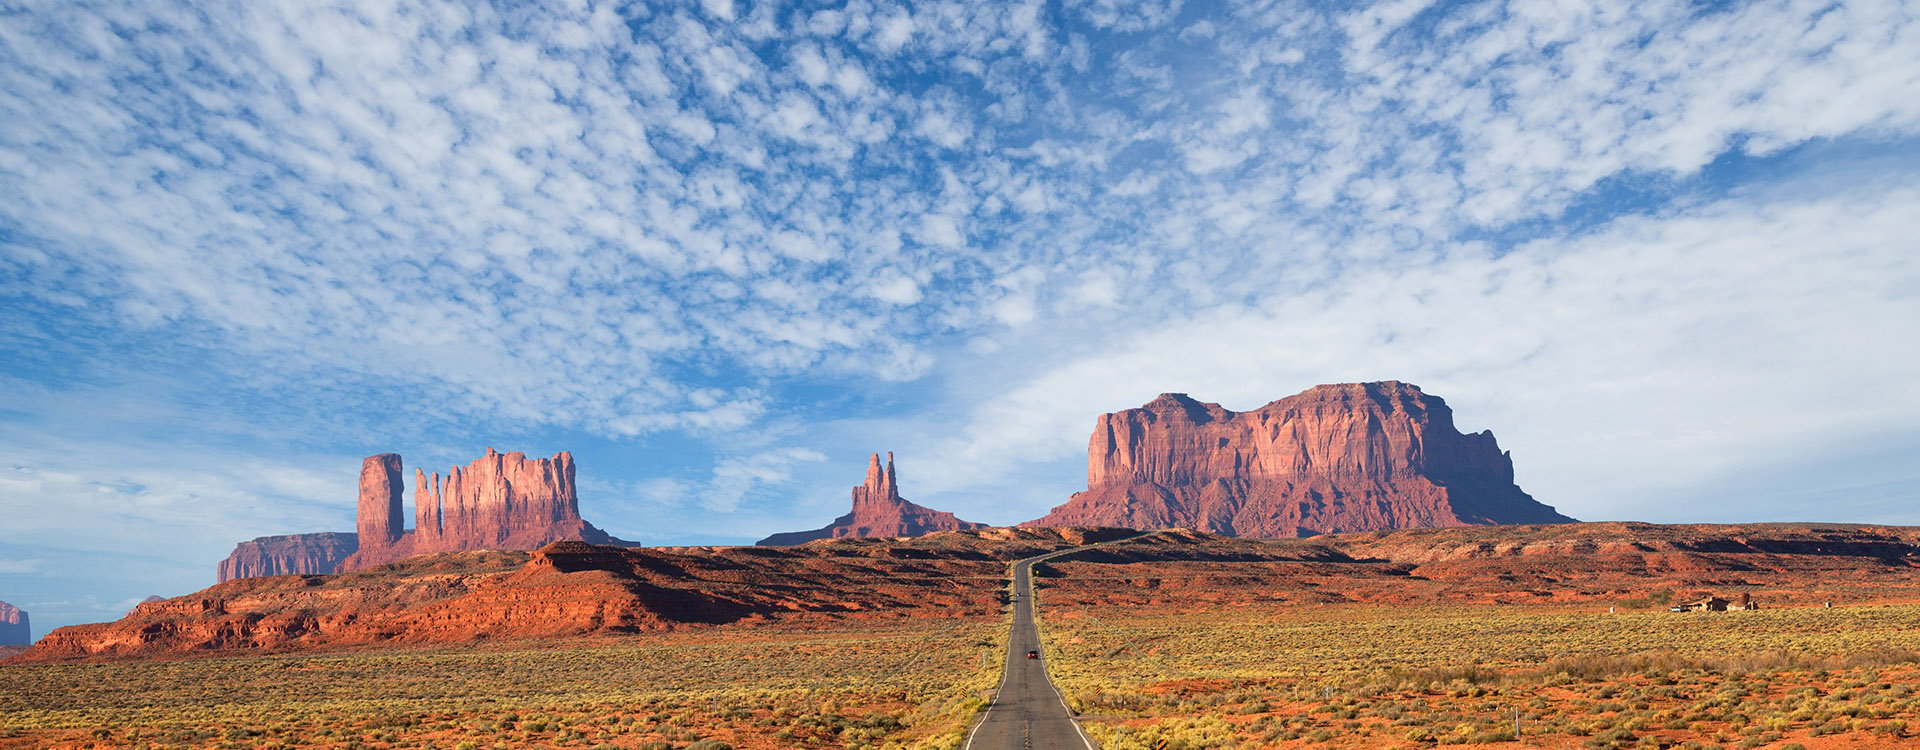 Road leading to Monument Valley, USA